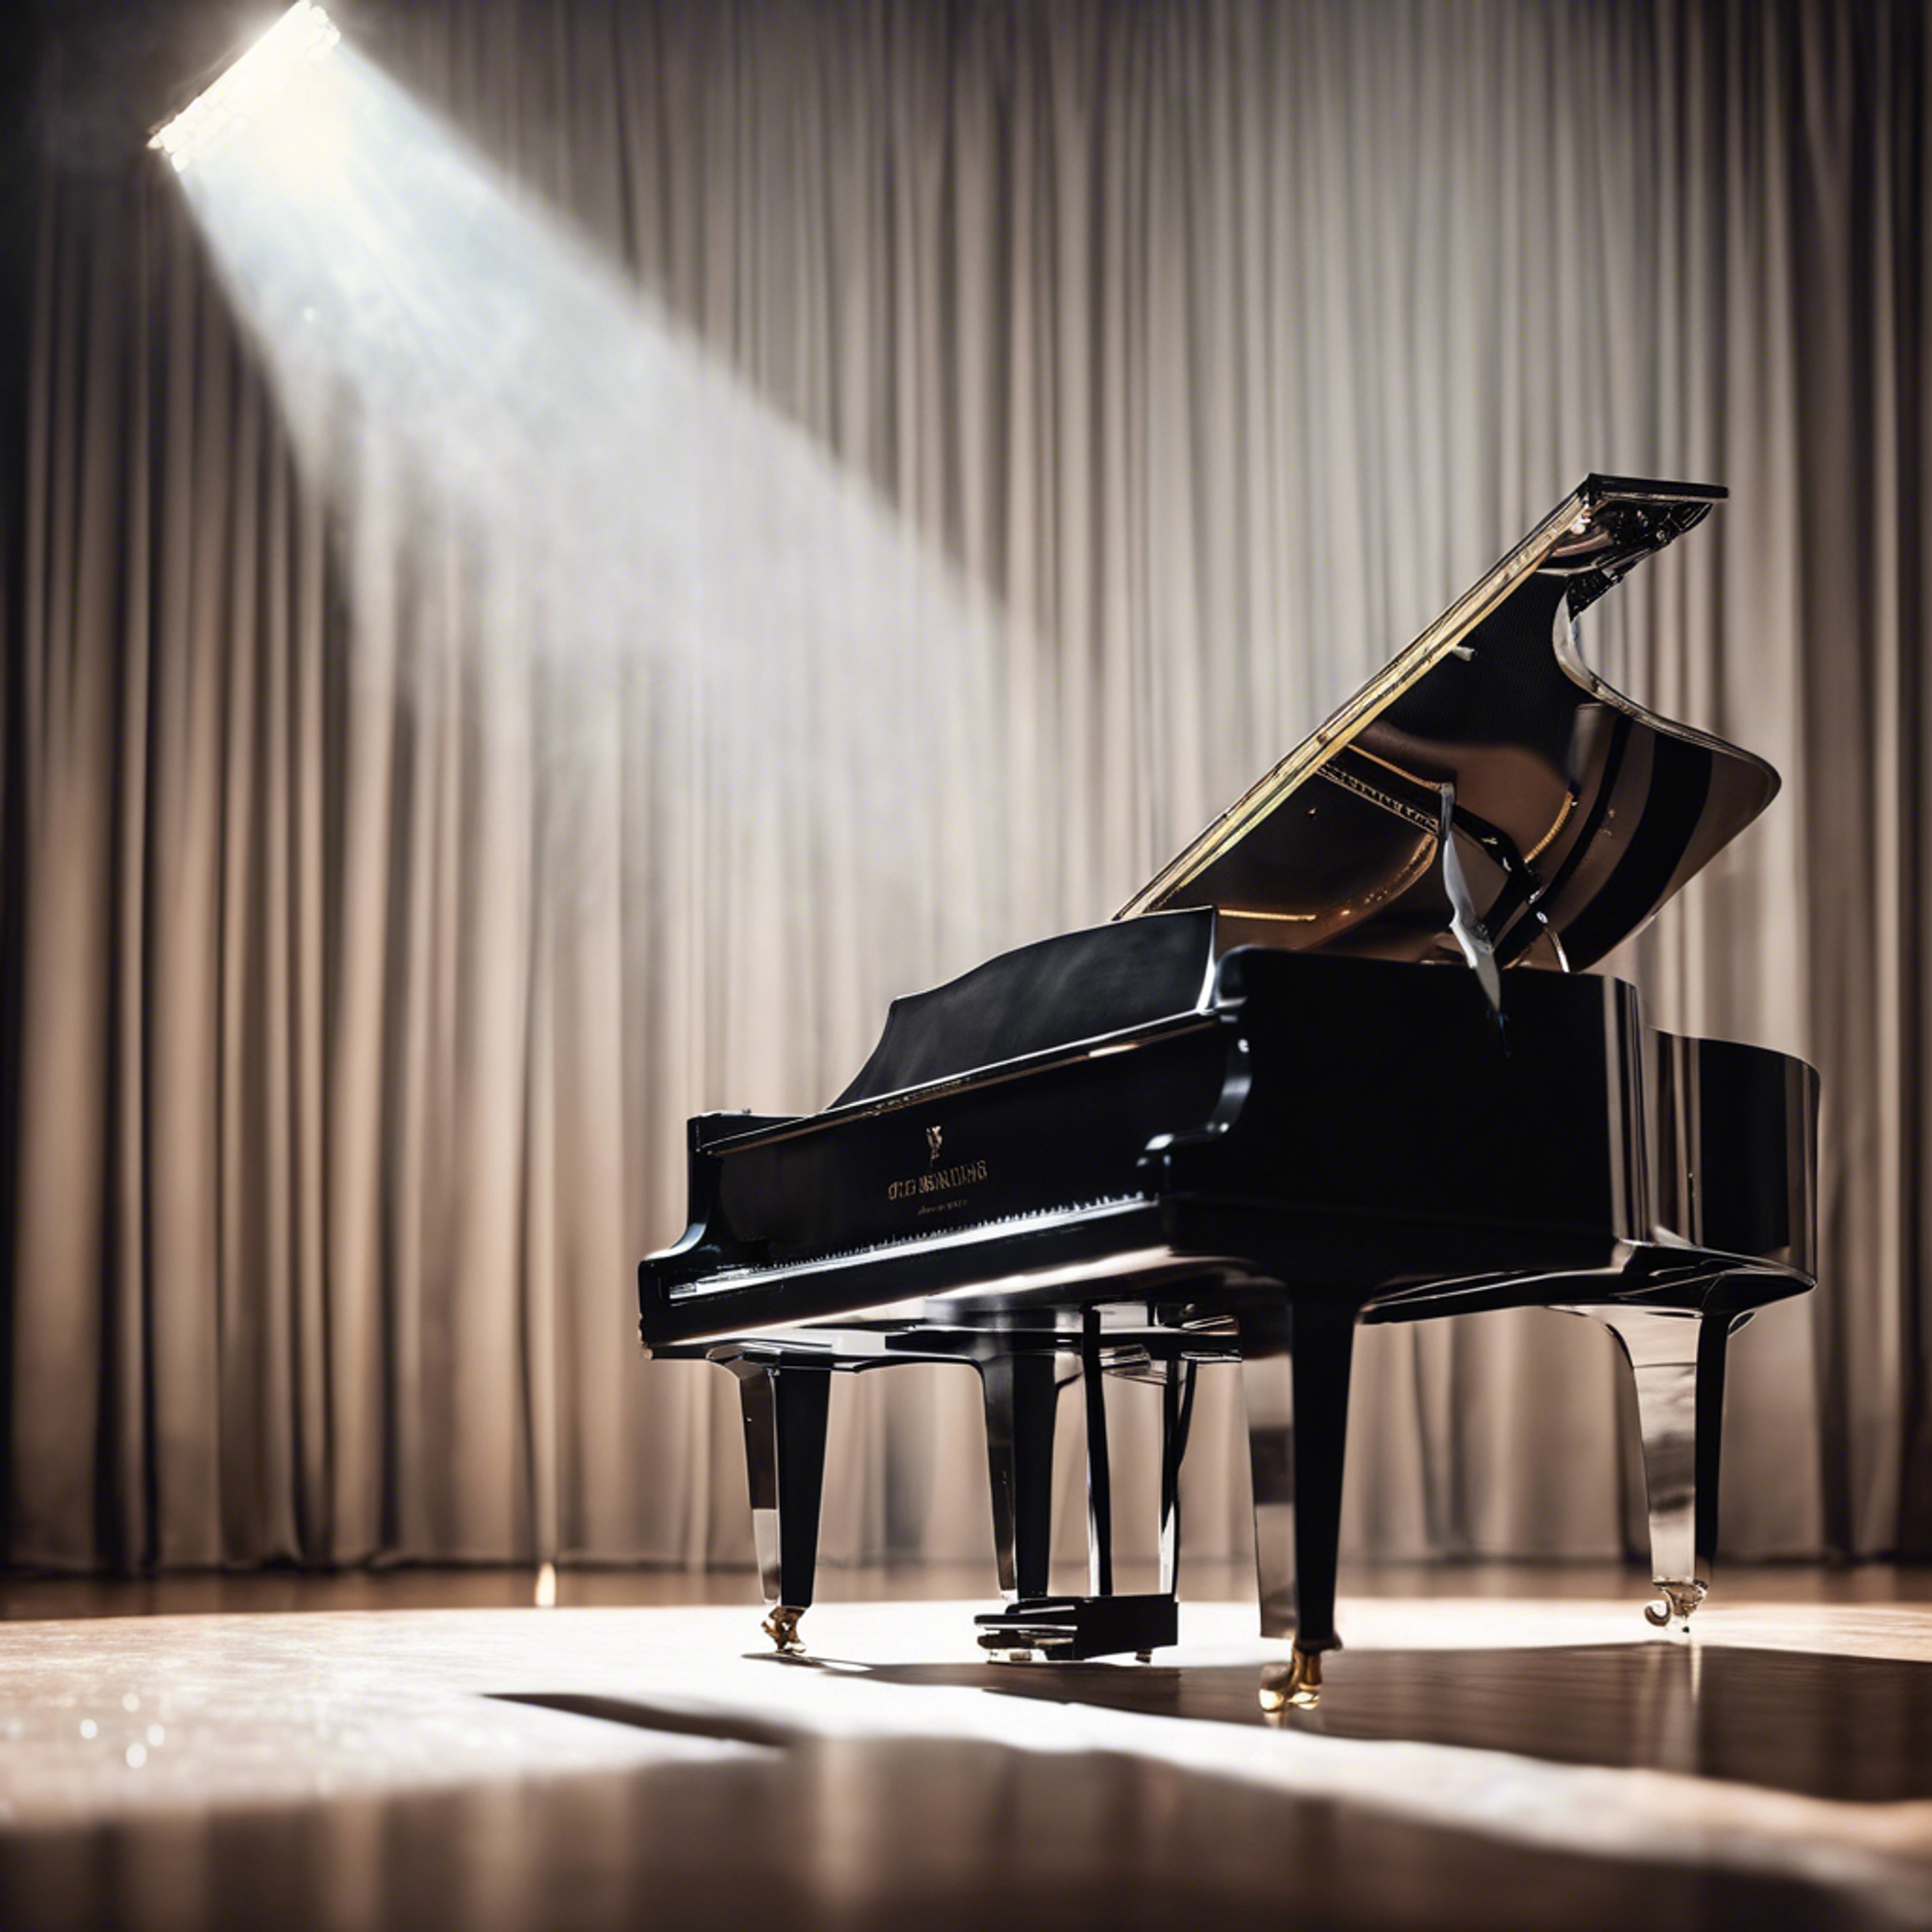 A black grand piano standing majestically on a stage with a white spotlight. Wallpaper[a7be9b4d639349e9be5c]